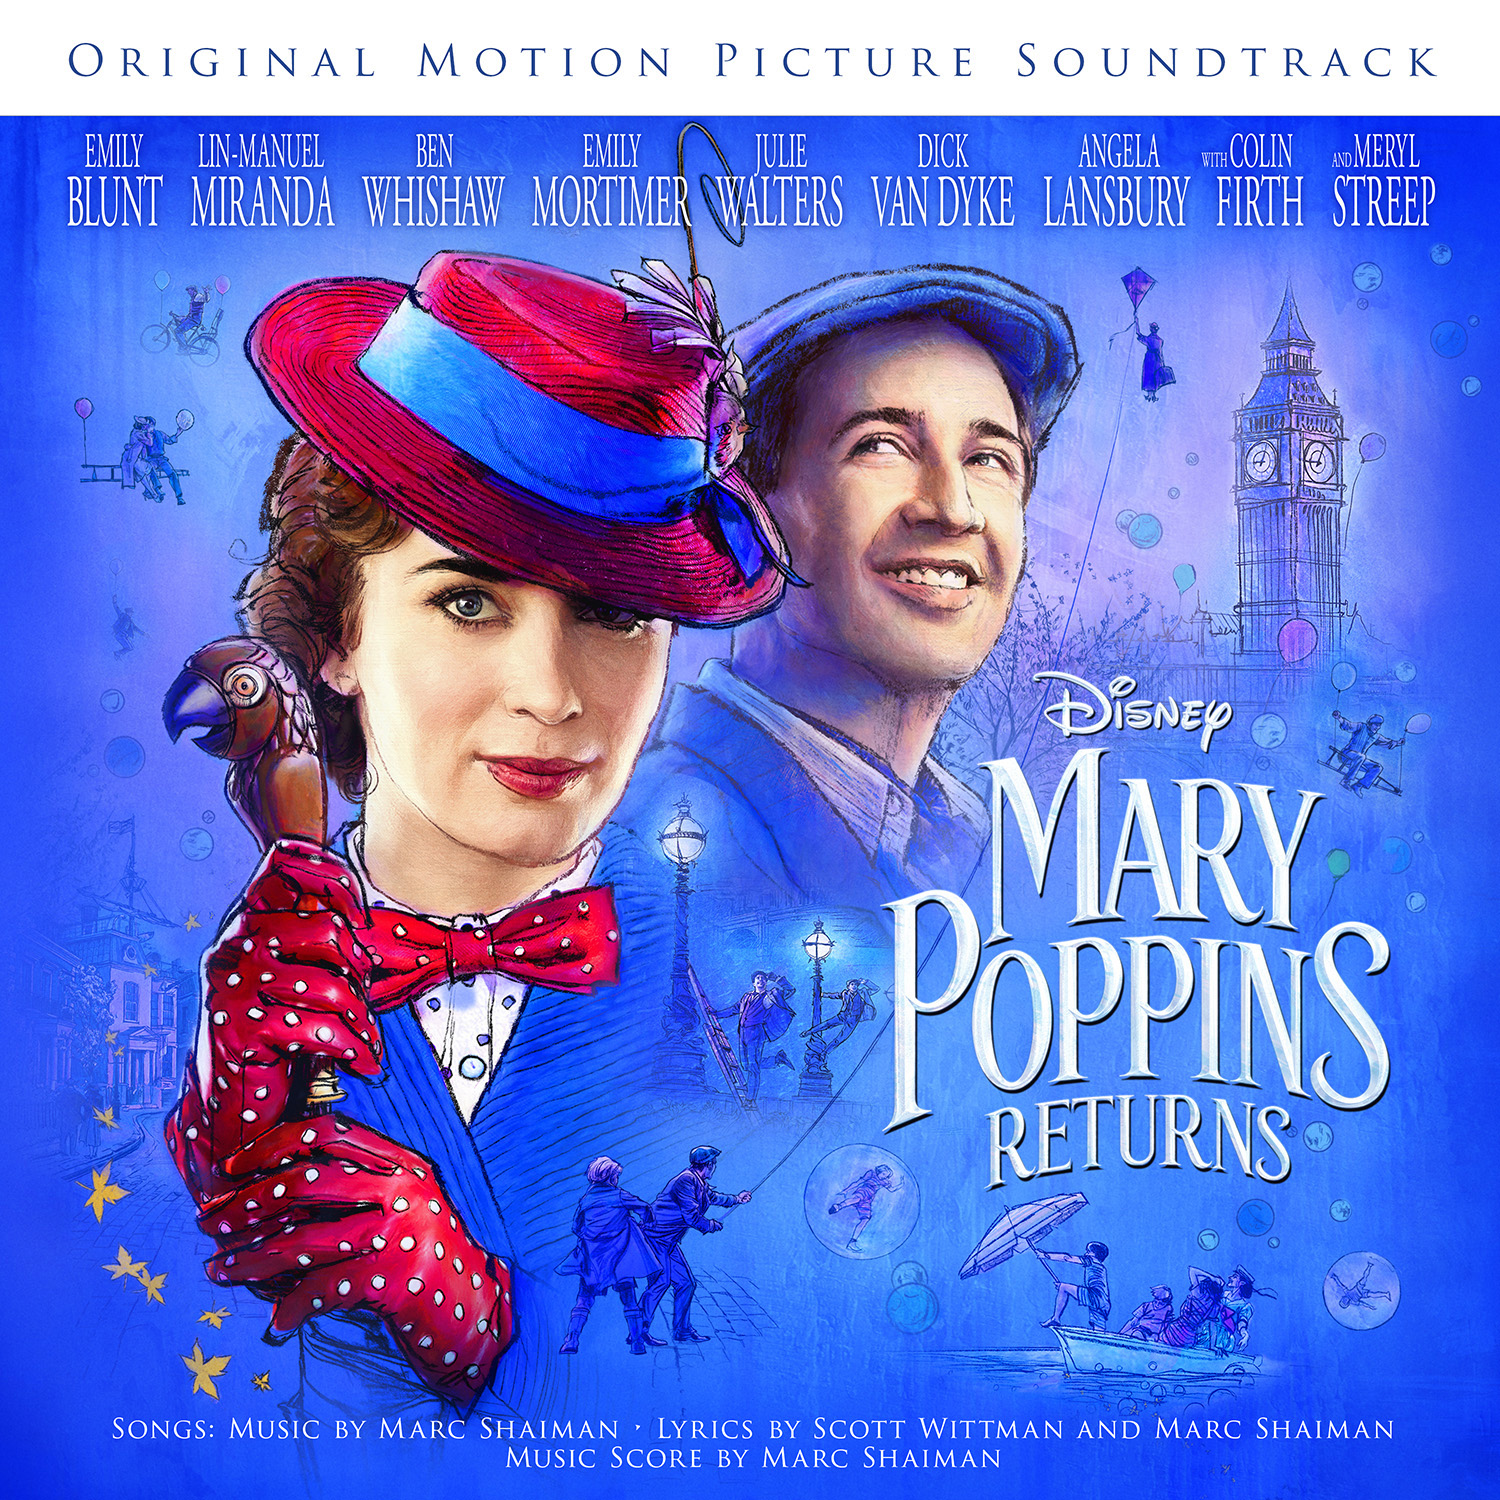 Grab Your Tickets for “Mary Poppins Returns” with Tickets on Sale Today